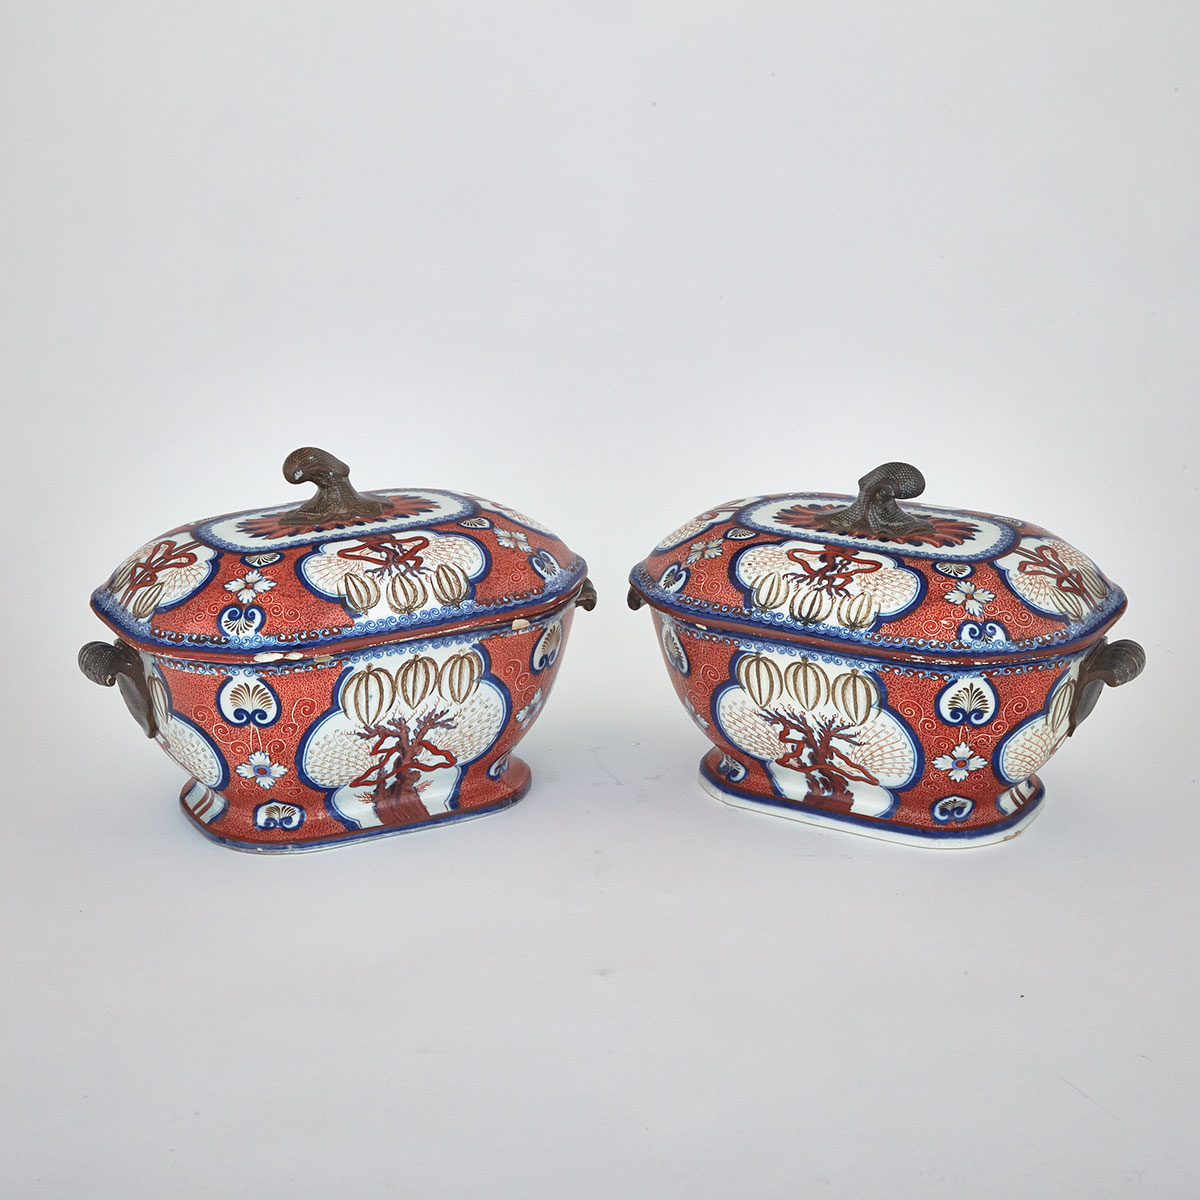 Pair of English Pearlware ‘Dollar’ Pattern Soup Tureens with Covers, c.1820